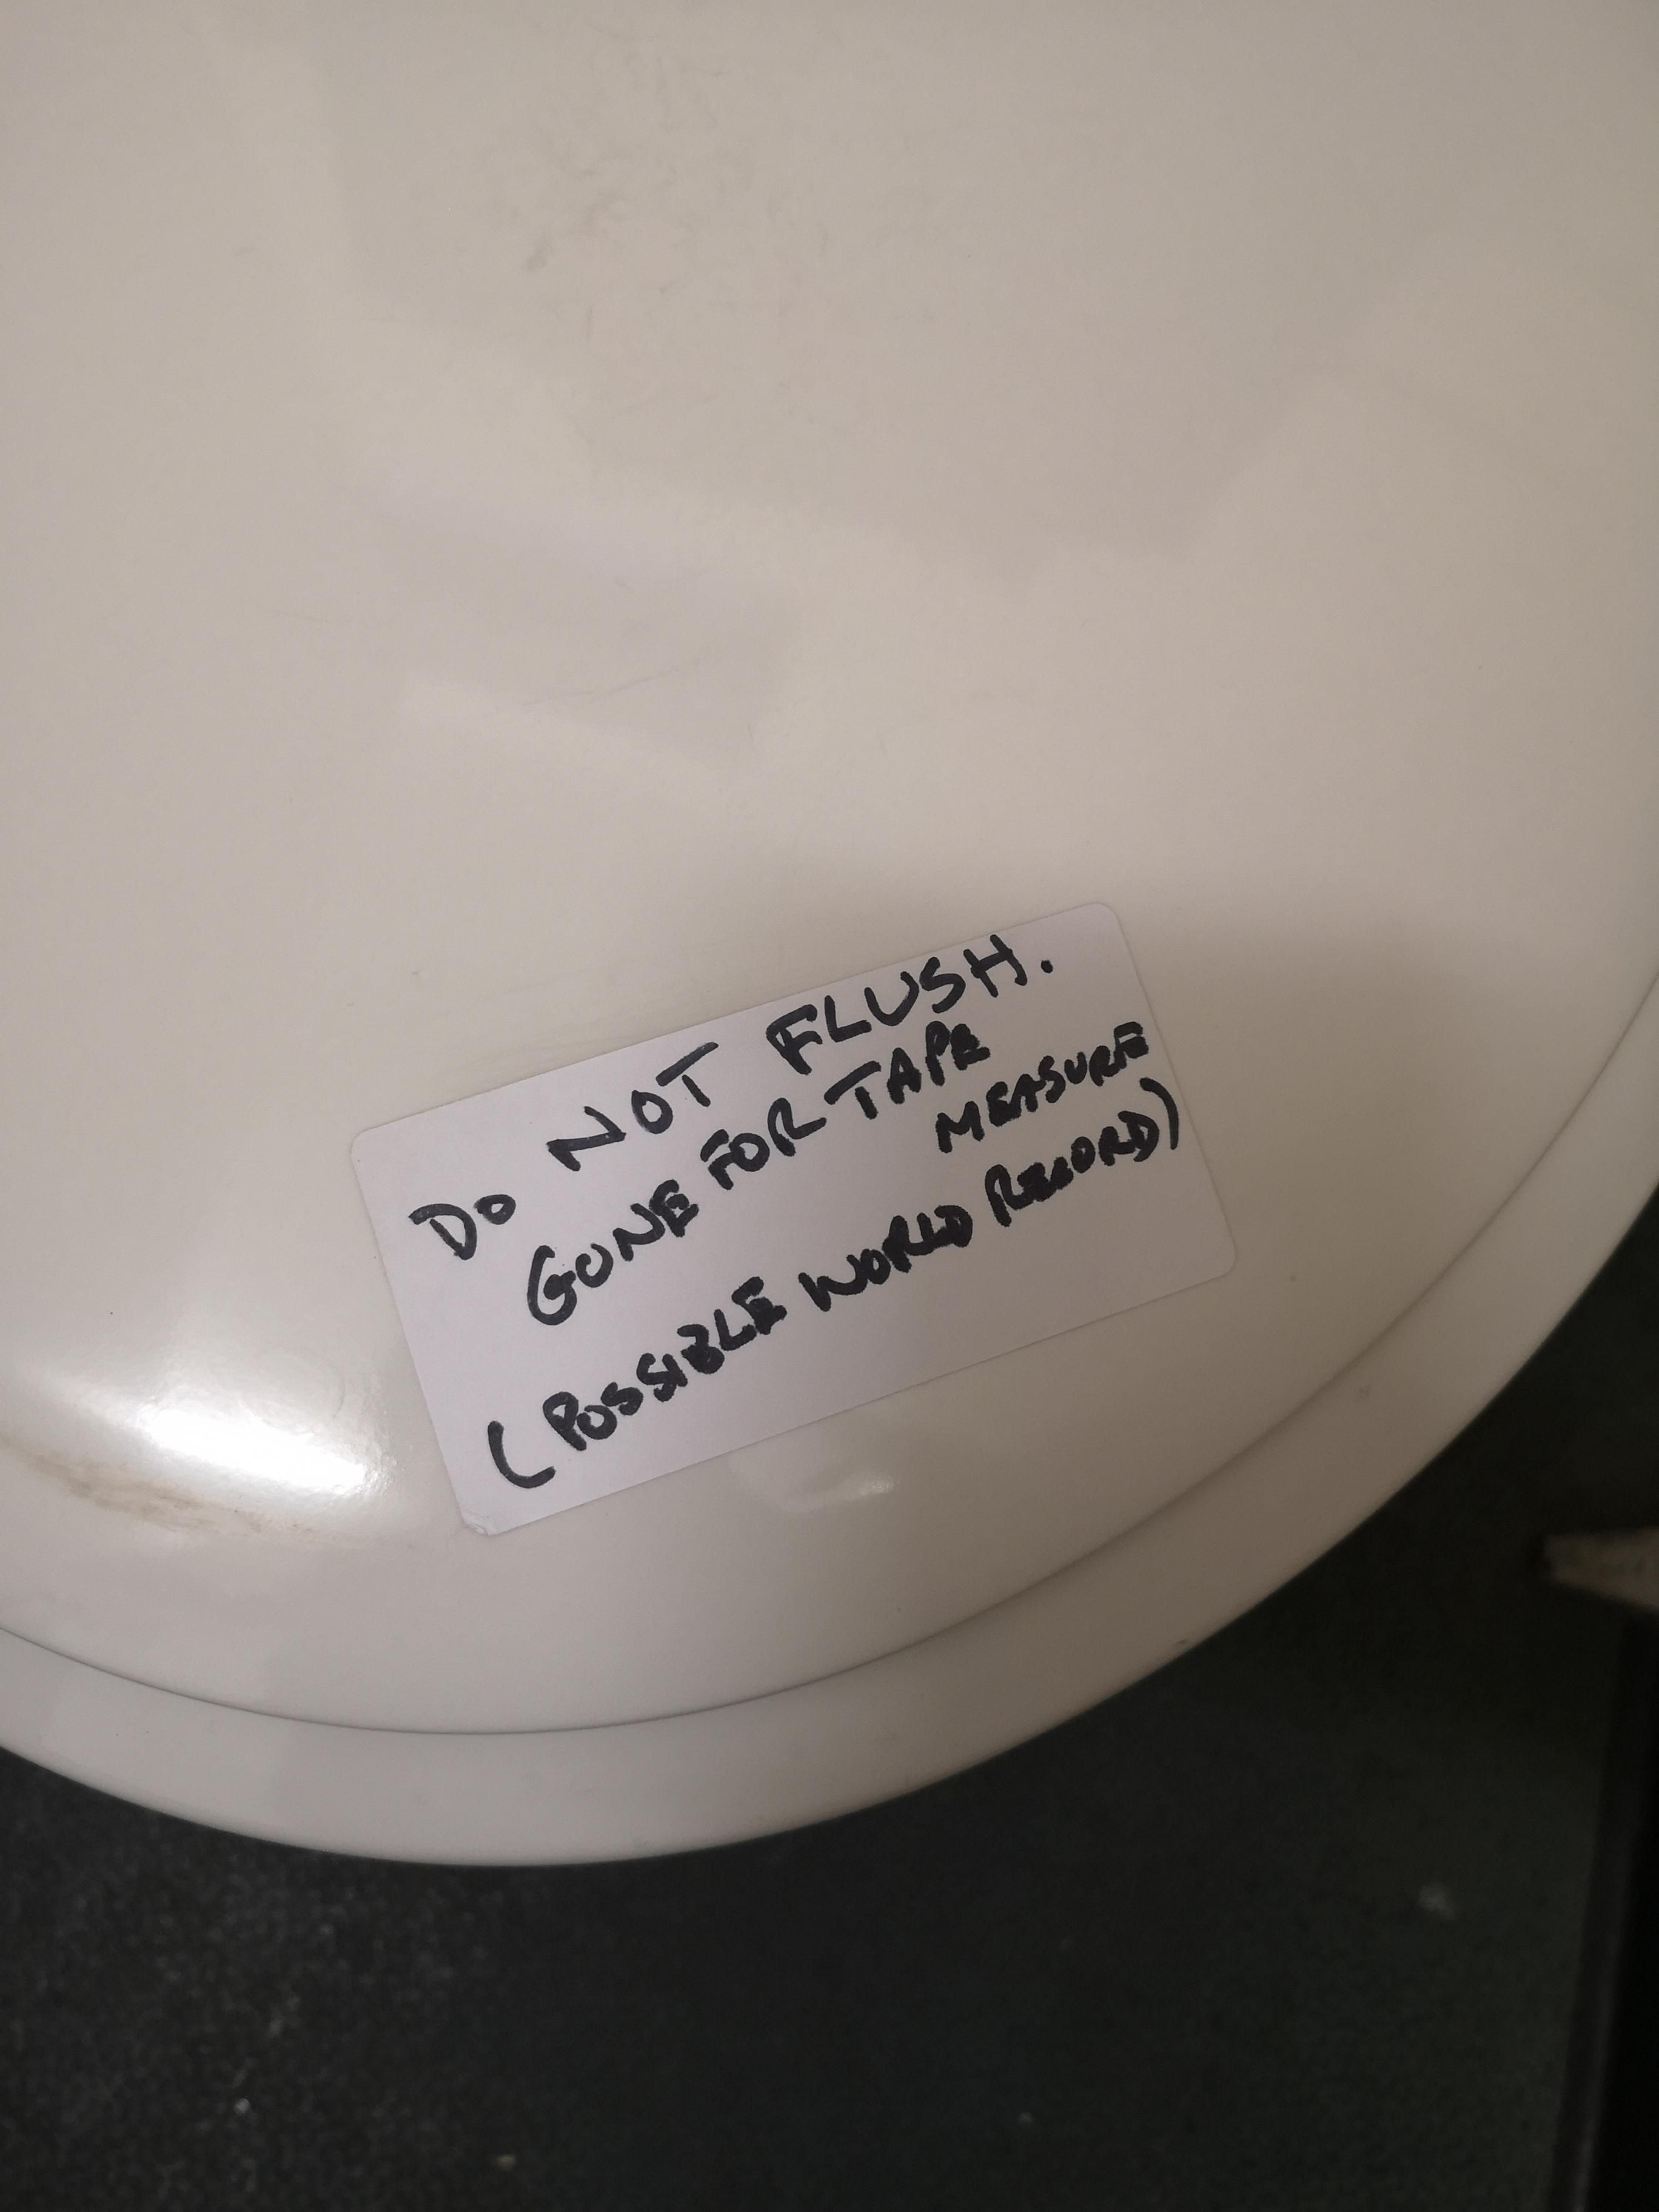 Found on a toilet in work, I wish i could say it was a joke, but whoever used this toilet, sir, i hope youre okay...